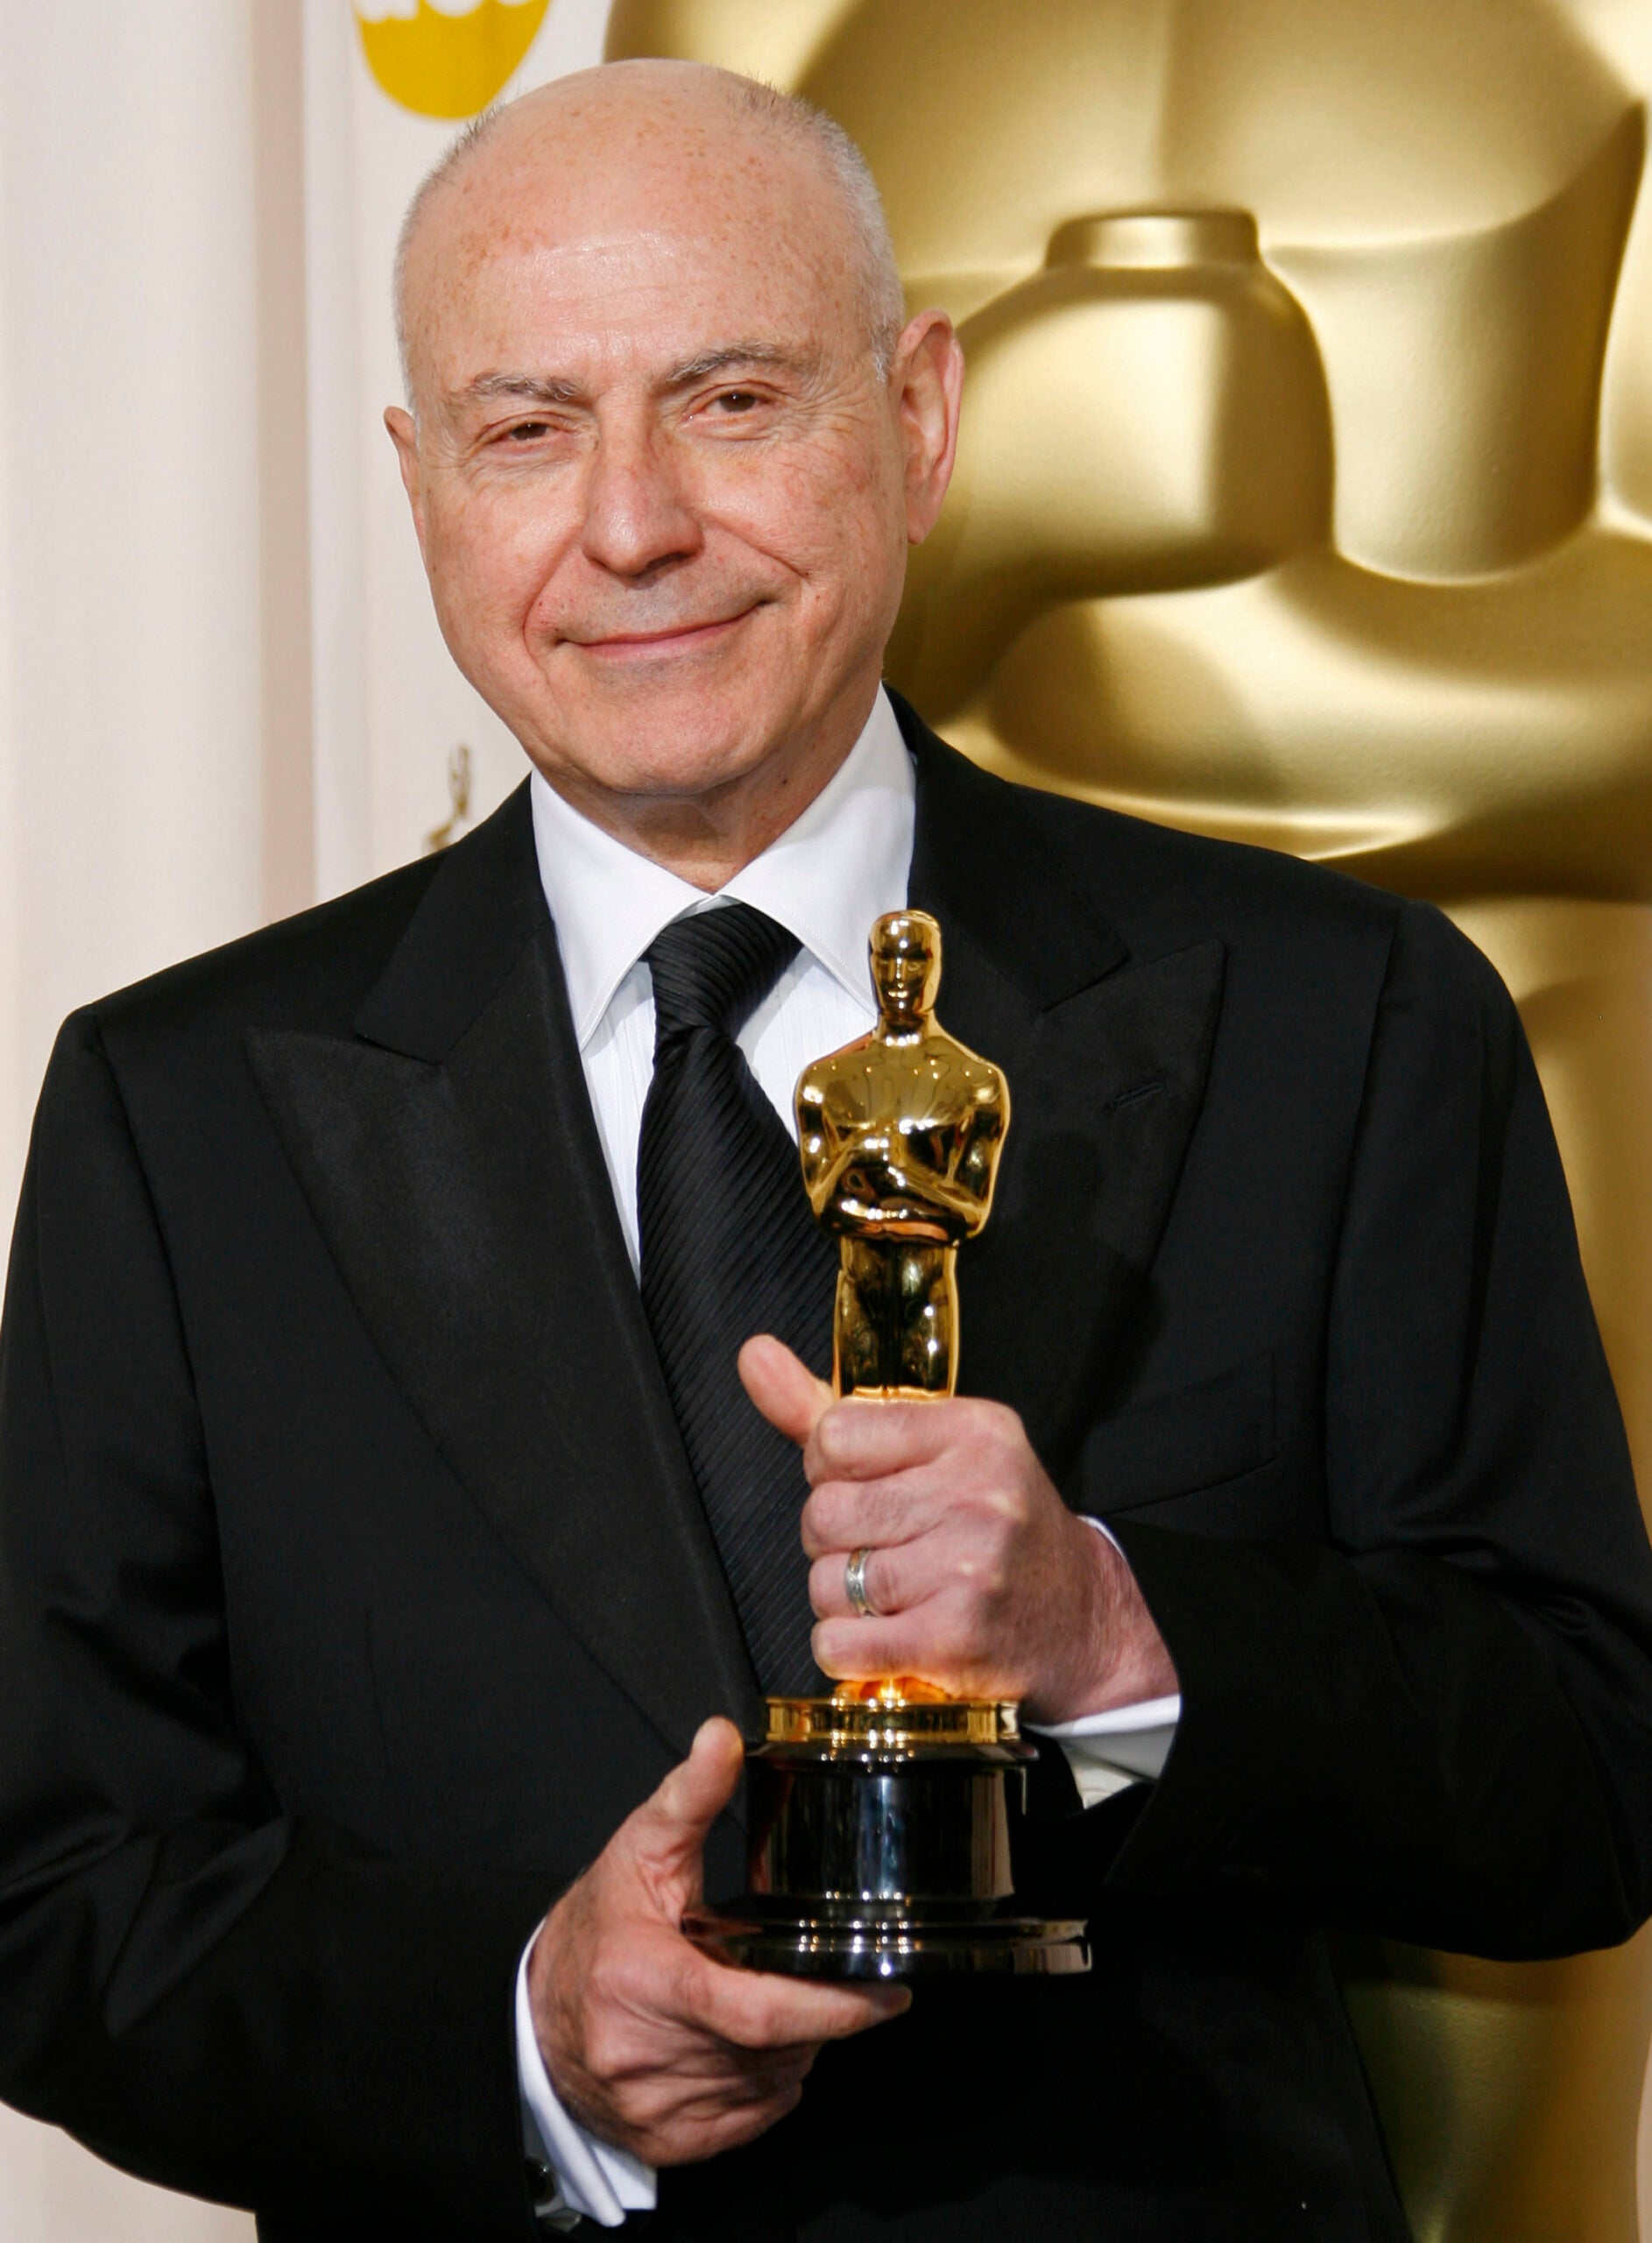 Alan Arkin poses with the Oscar he won for best supporting actor for his work in "Little Miss Sunshine" at the 79th Academy Awards, Sunday, Feb. 25, 2007, in Los Angeles.